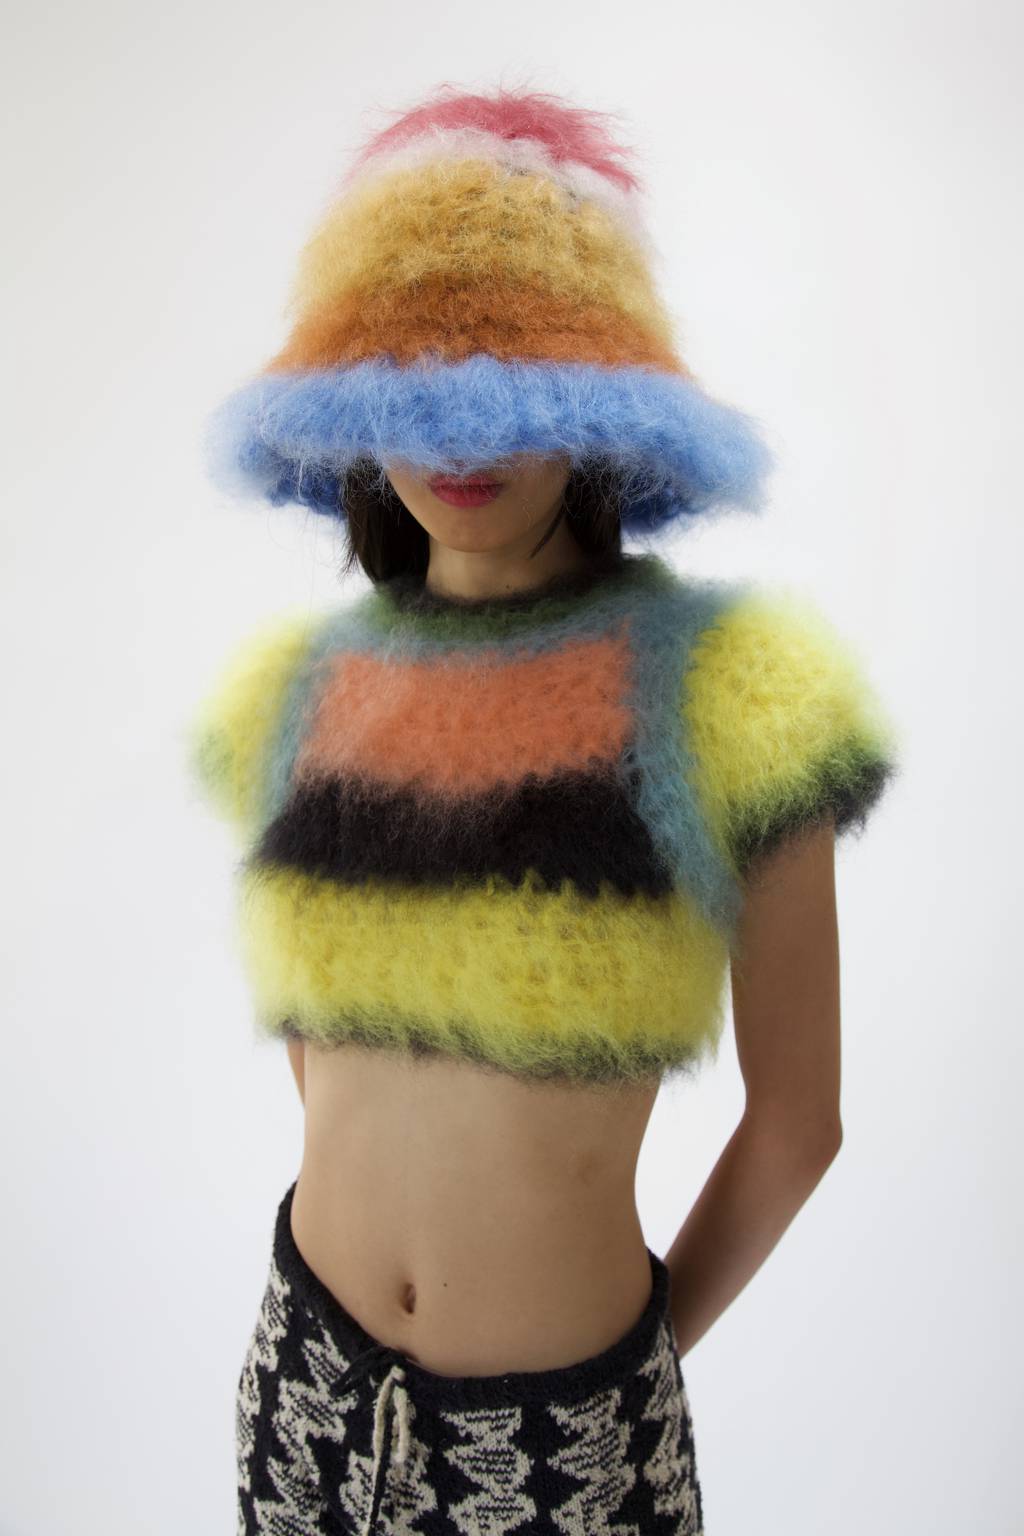 Women wearing a fuzzy knitwear hat and cropped jumper. Both brightly colour stripes.